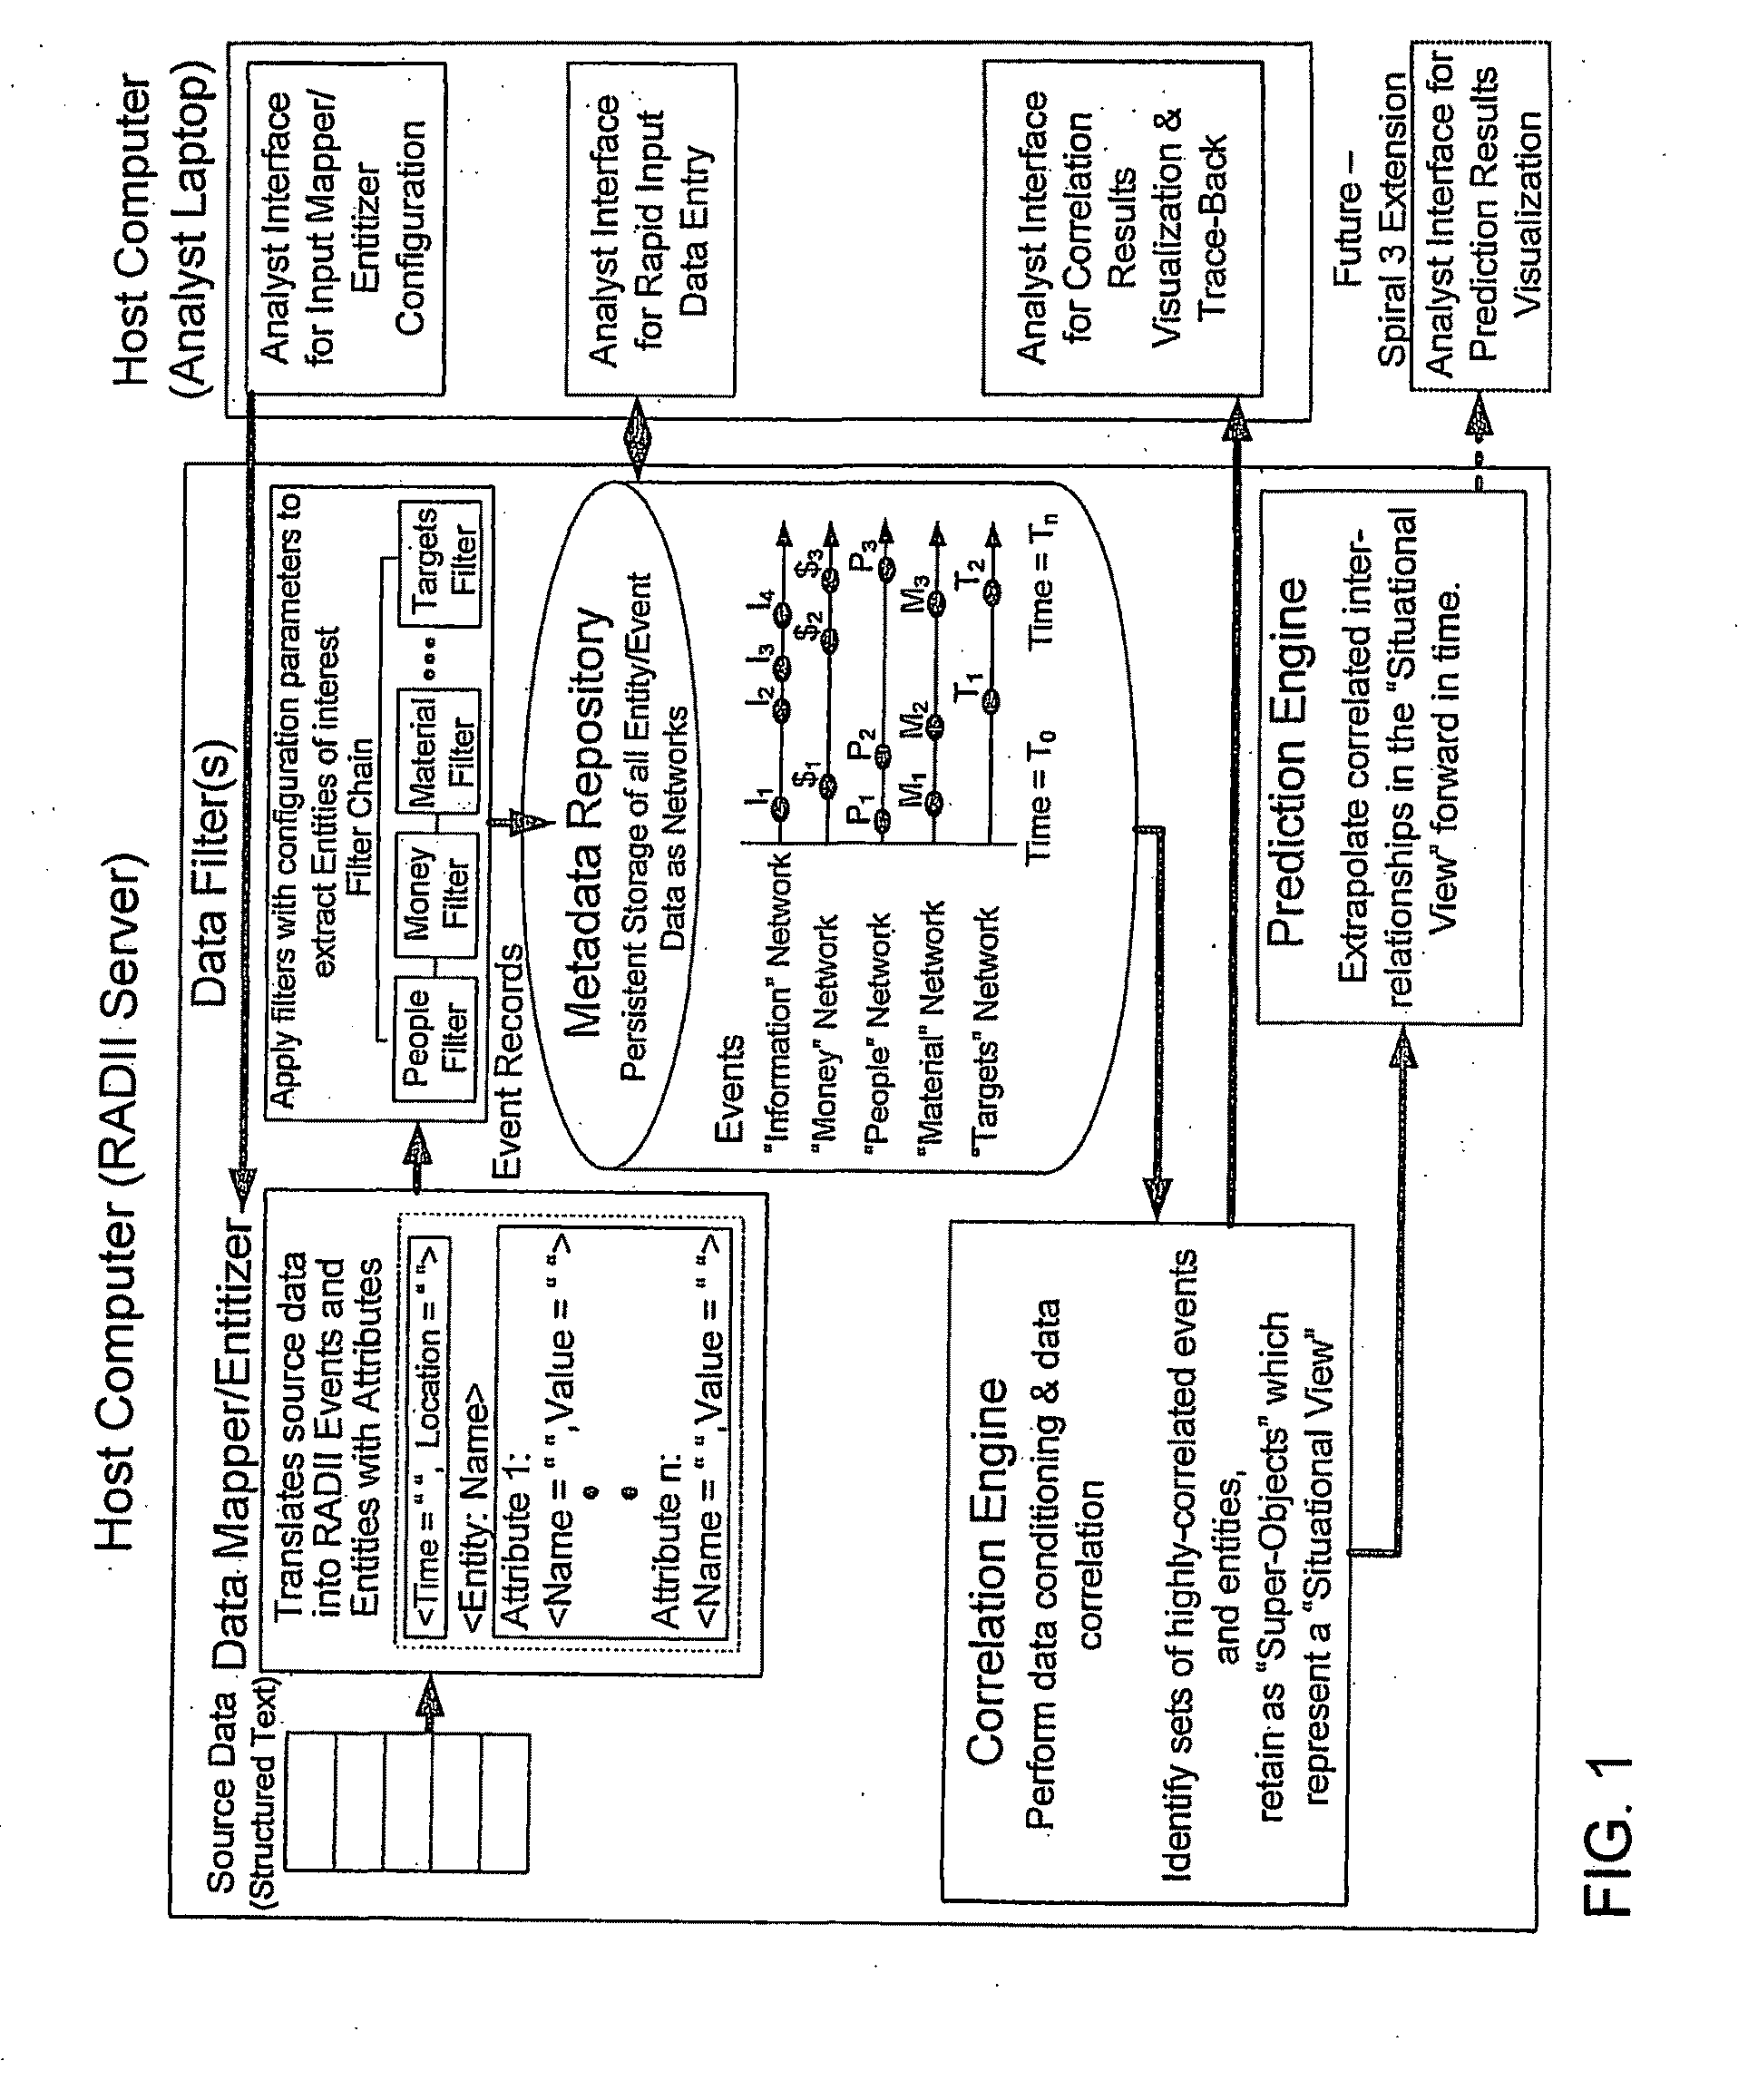 System and method for correlating past activities, determining hidden relationships and predicting future activities